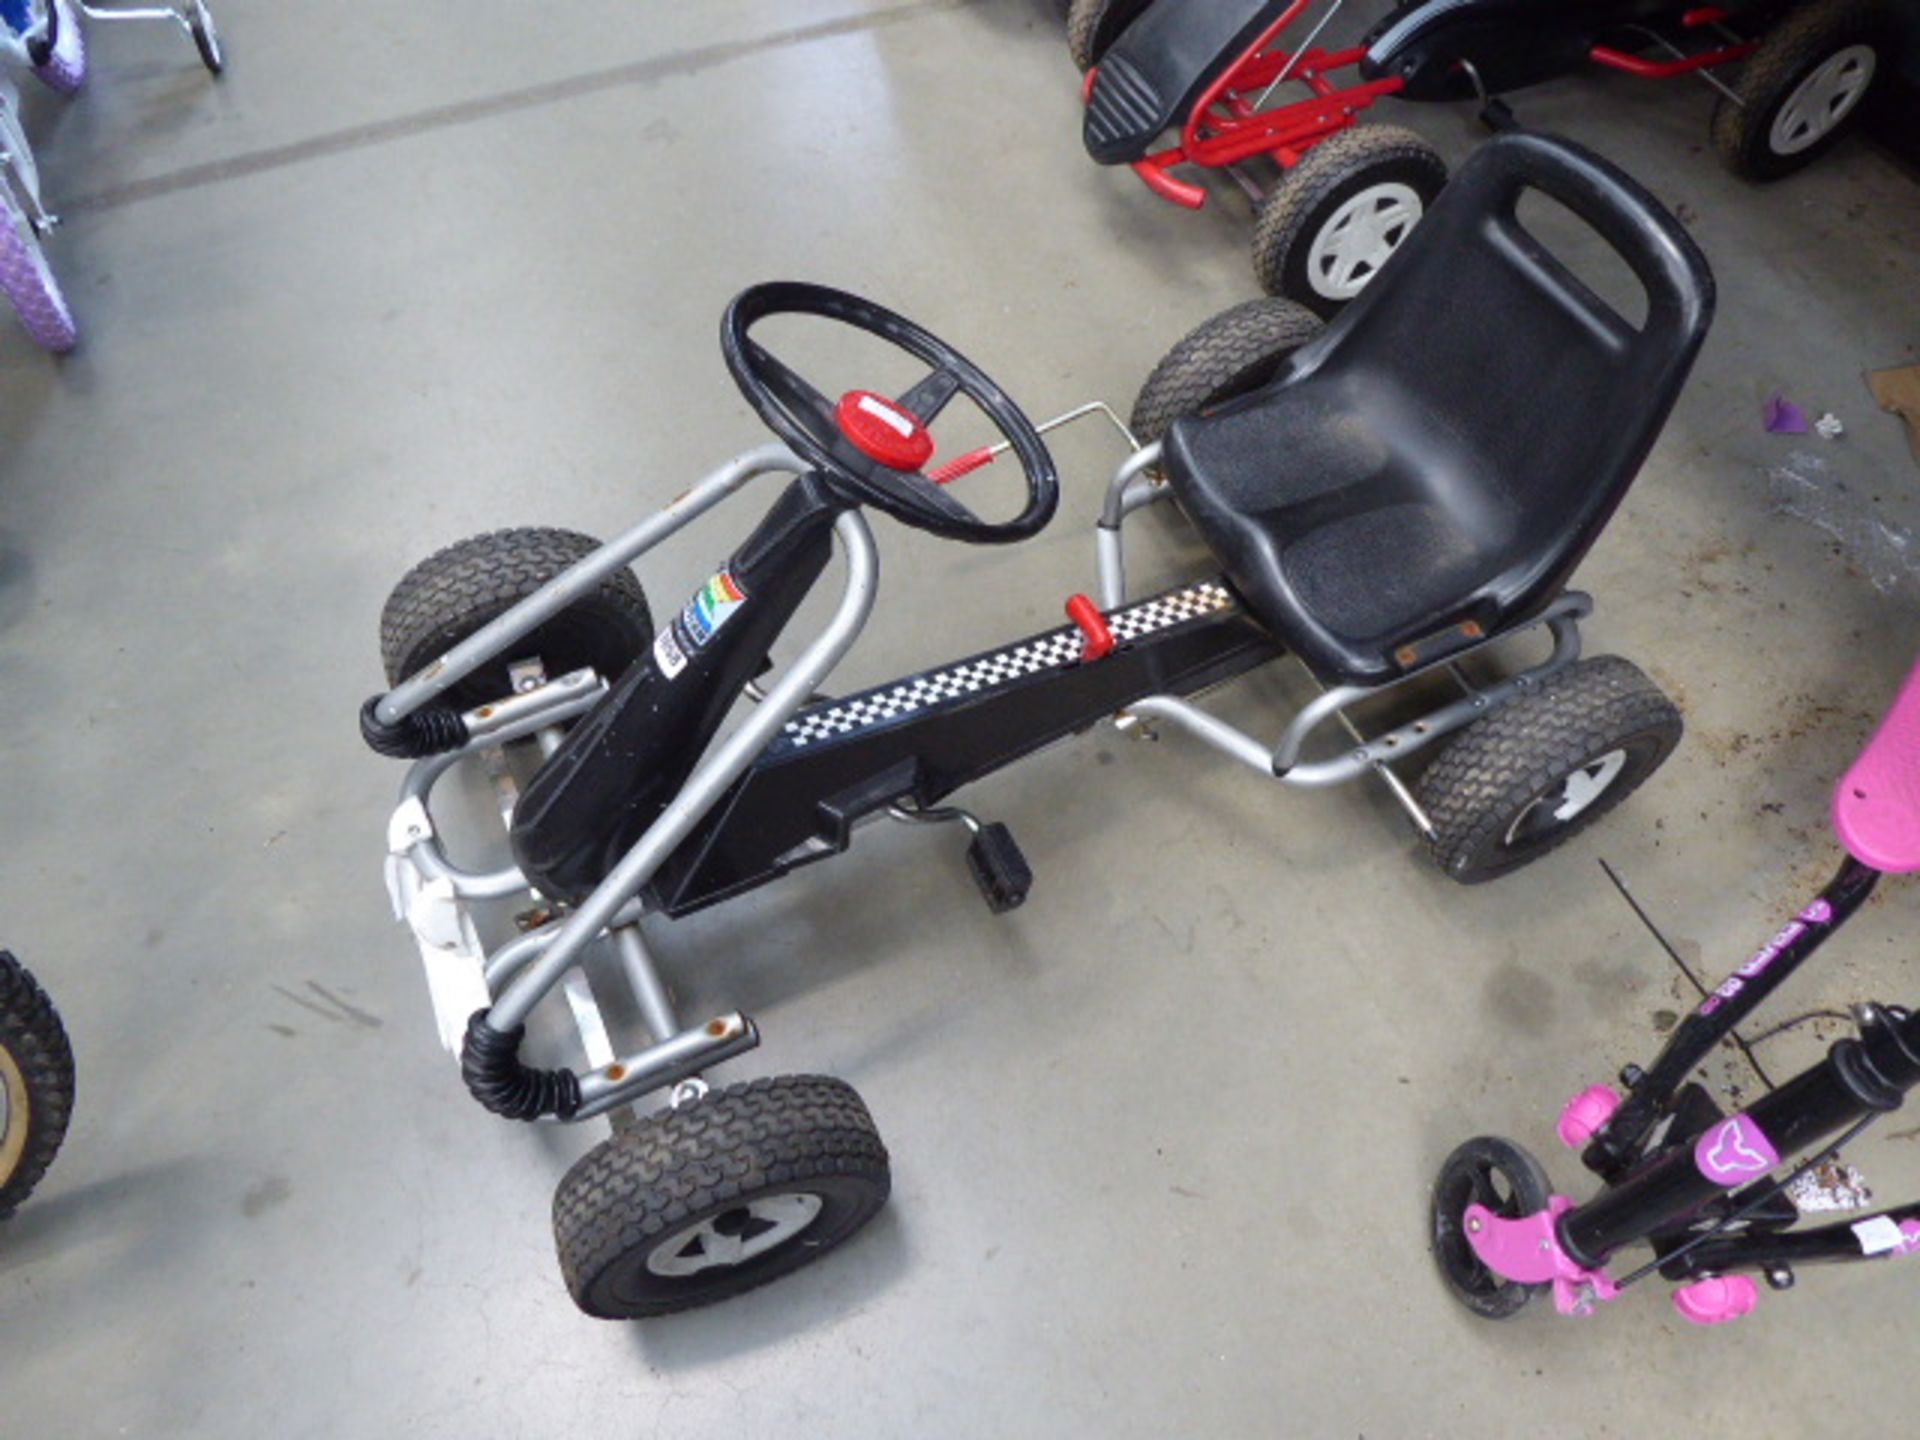 4031 Keter Silver and black electric go-kart